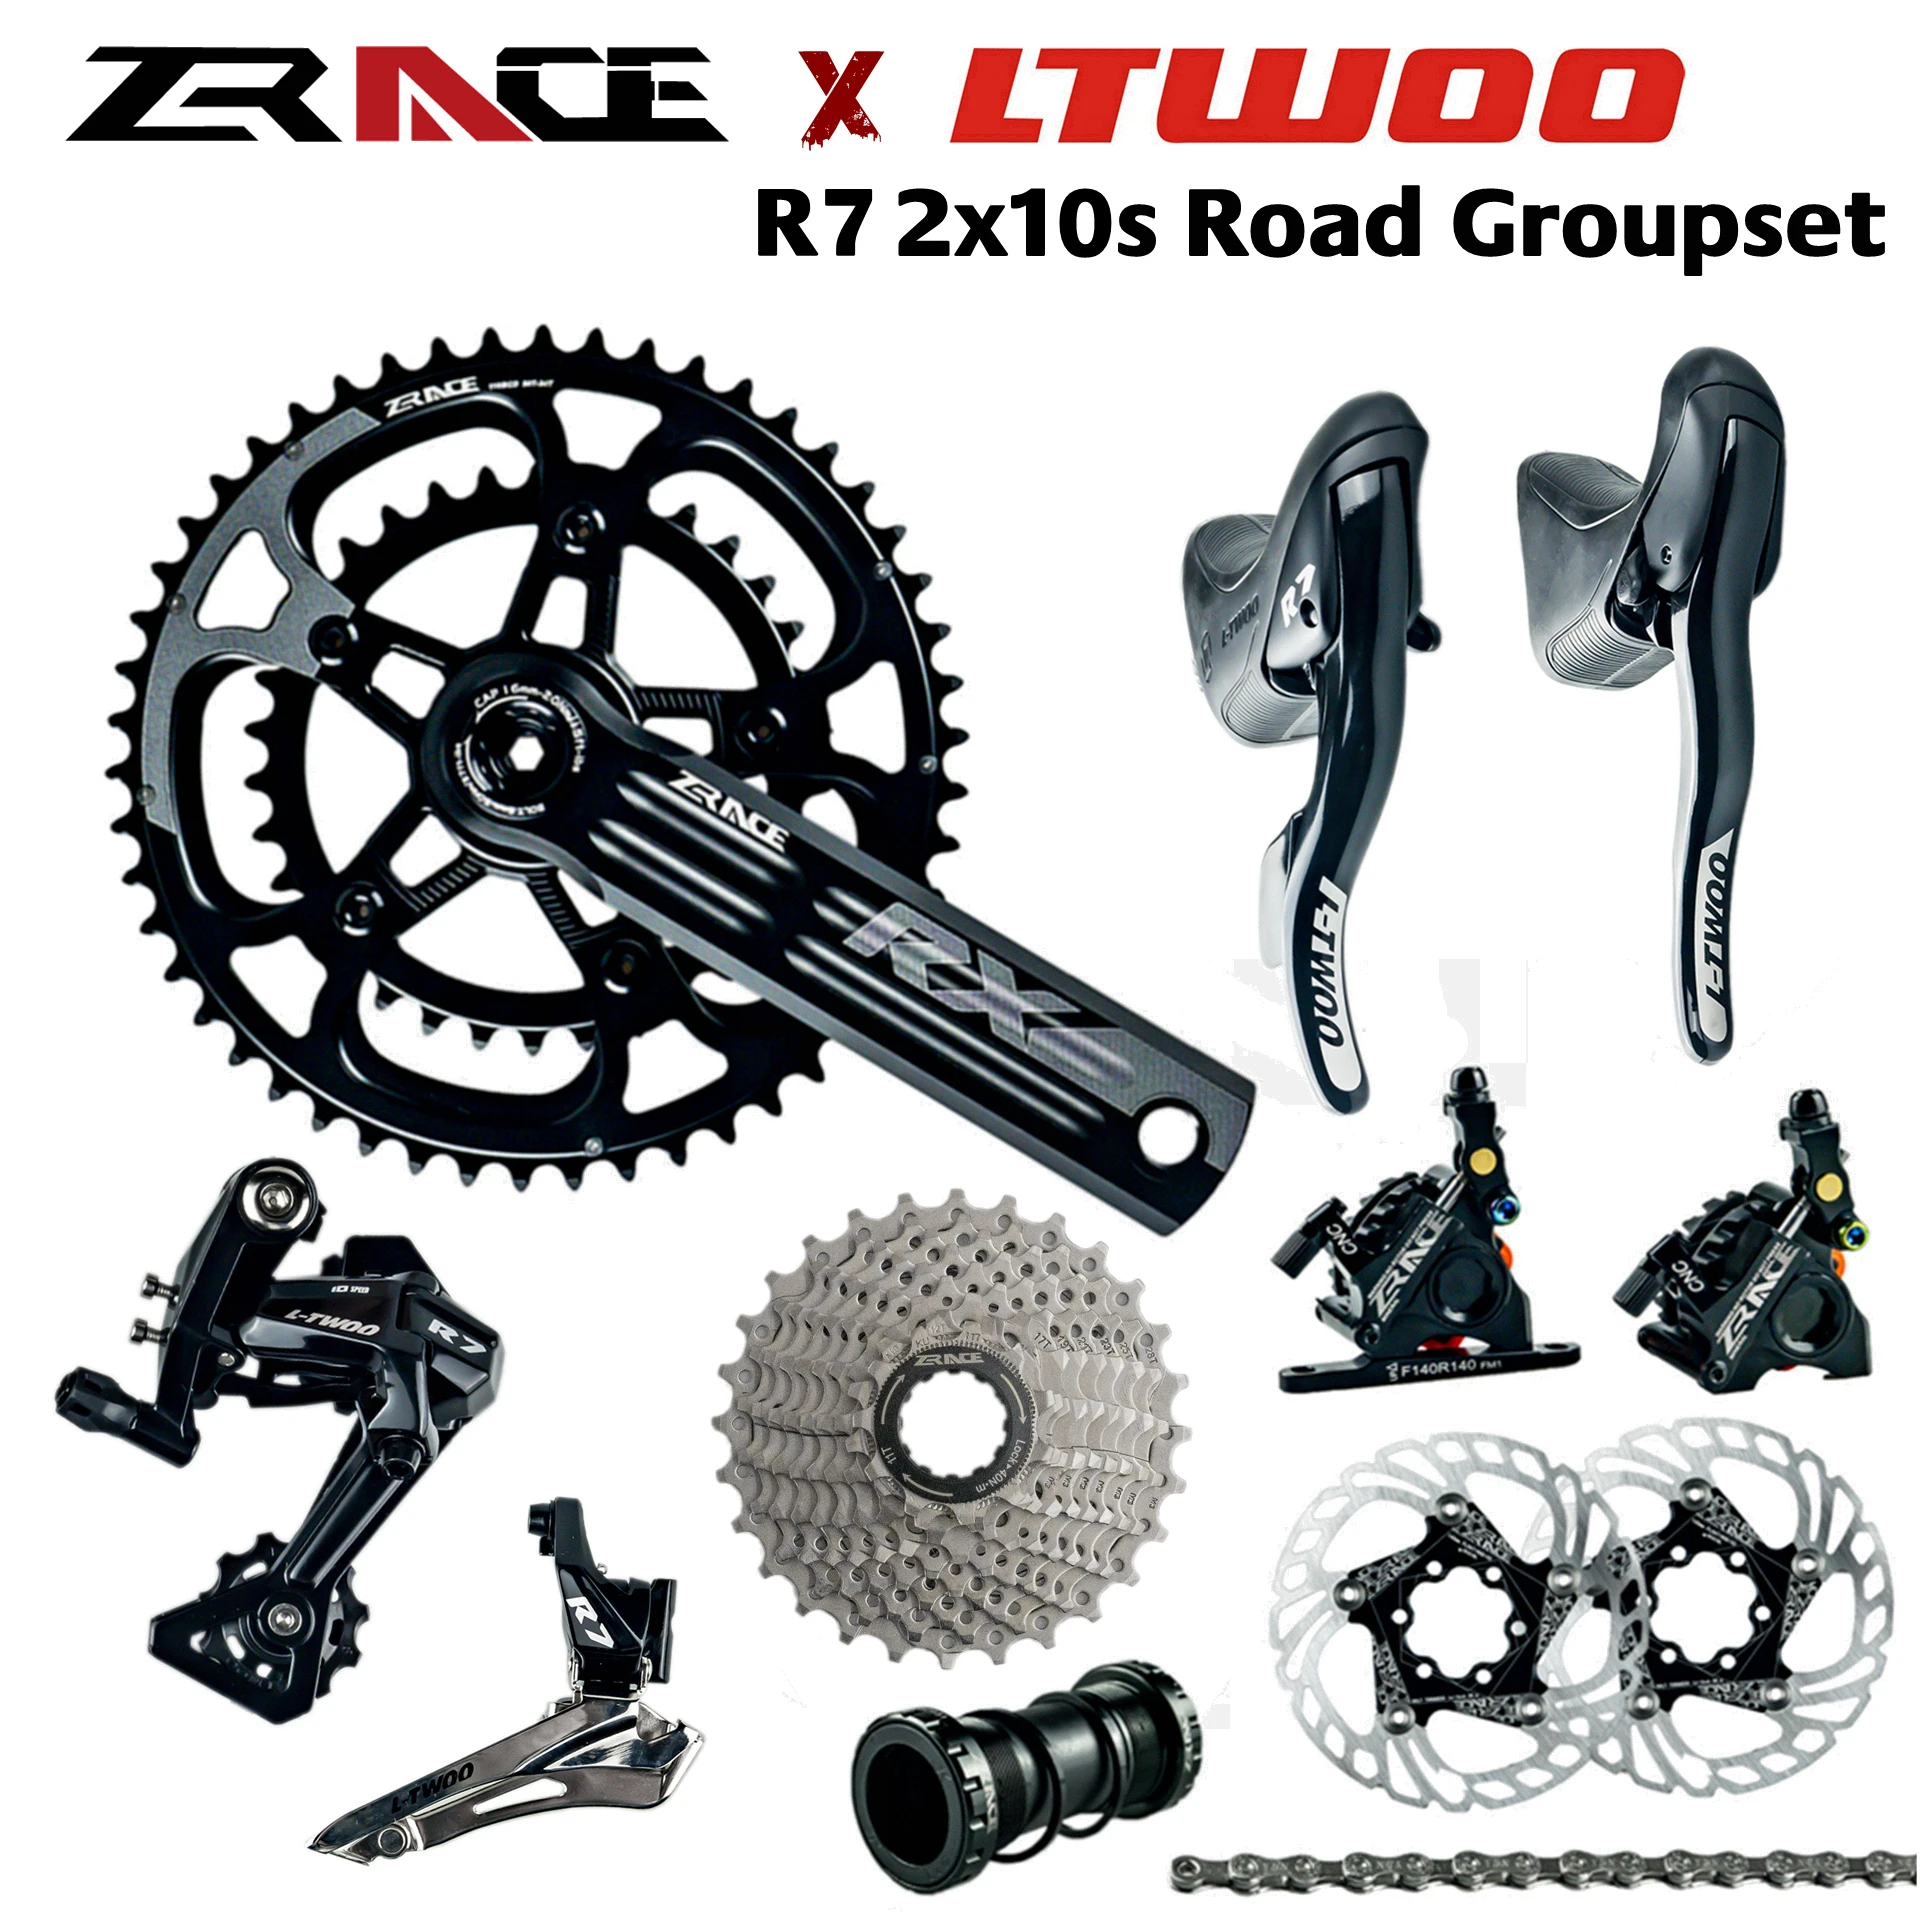 

LTWOO R7 + ZRACE Crank Hydraulic Disc Brake Cassette Chain 2x10 Speed, 20s Road Groupset, for Road bike Bicycle 4700, R3000